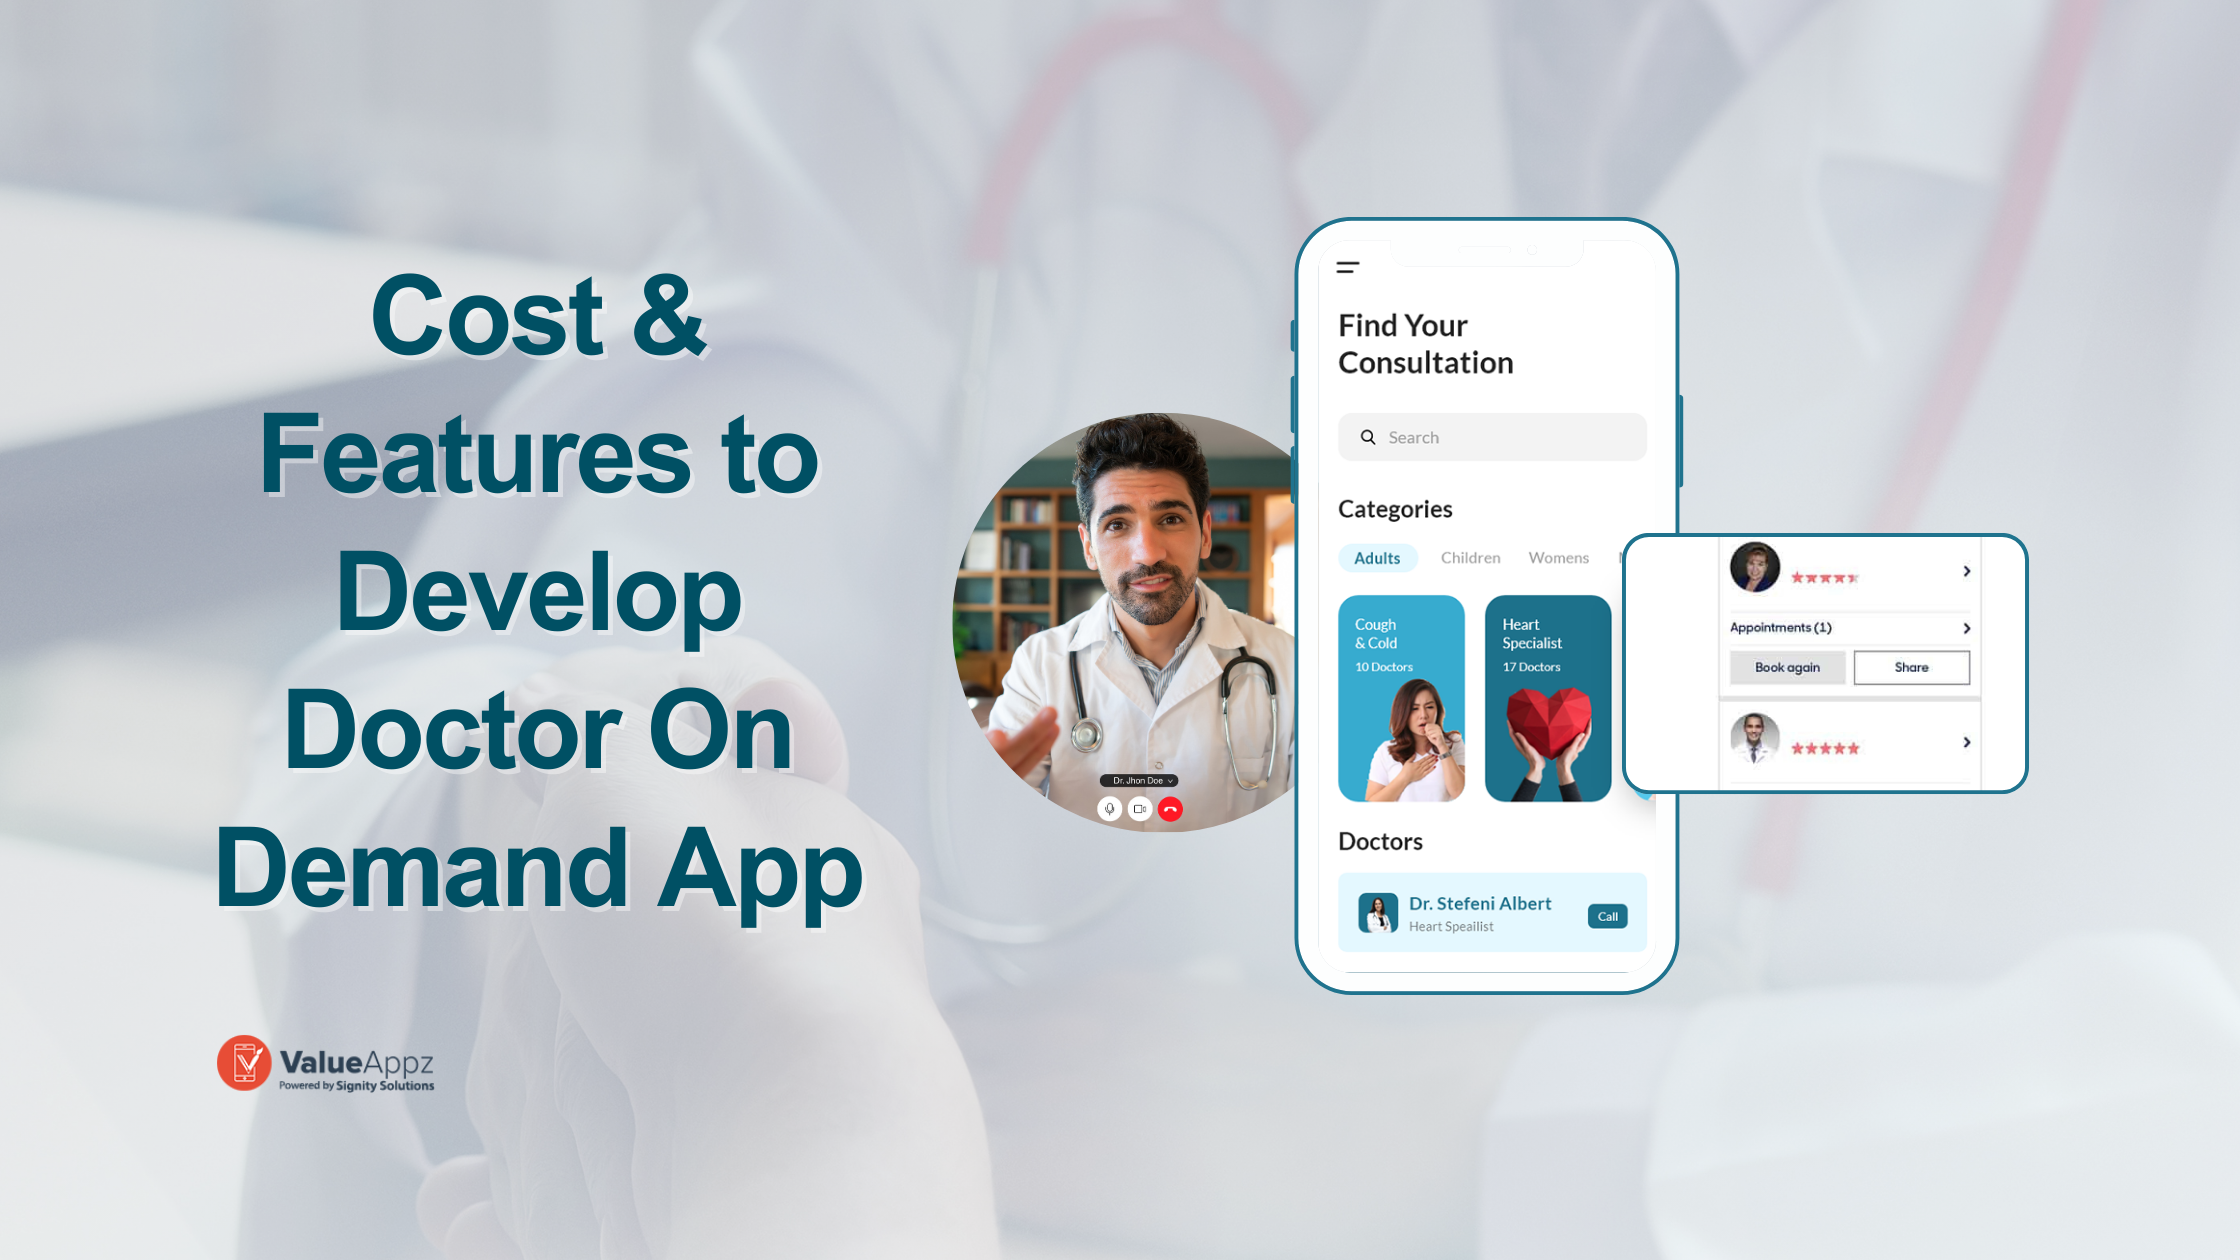 Cost and Features to Develop a Doctor on Demand App